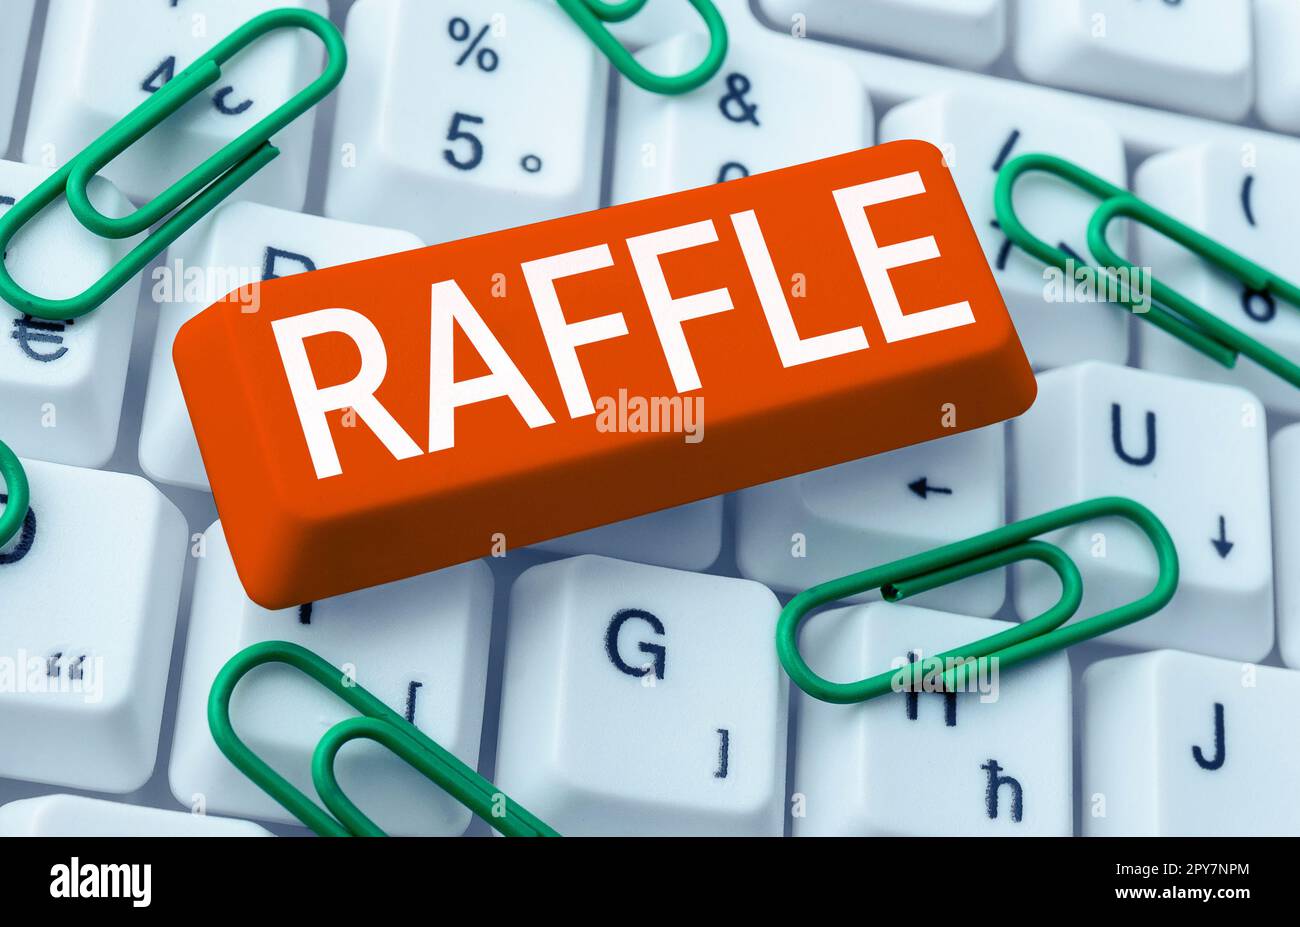 Sign displaying Raffle. Business overview means of raising money by selling numbered tickets offer as prize Stock Photo